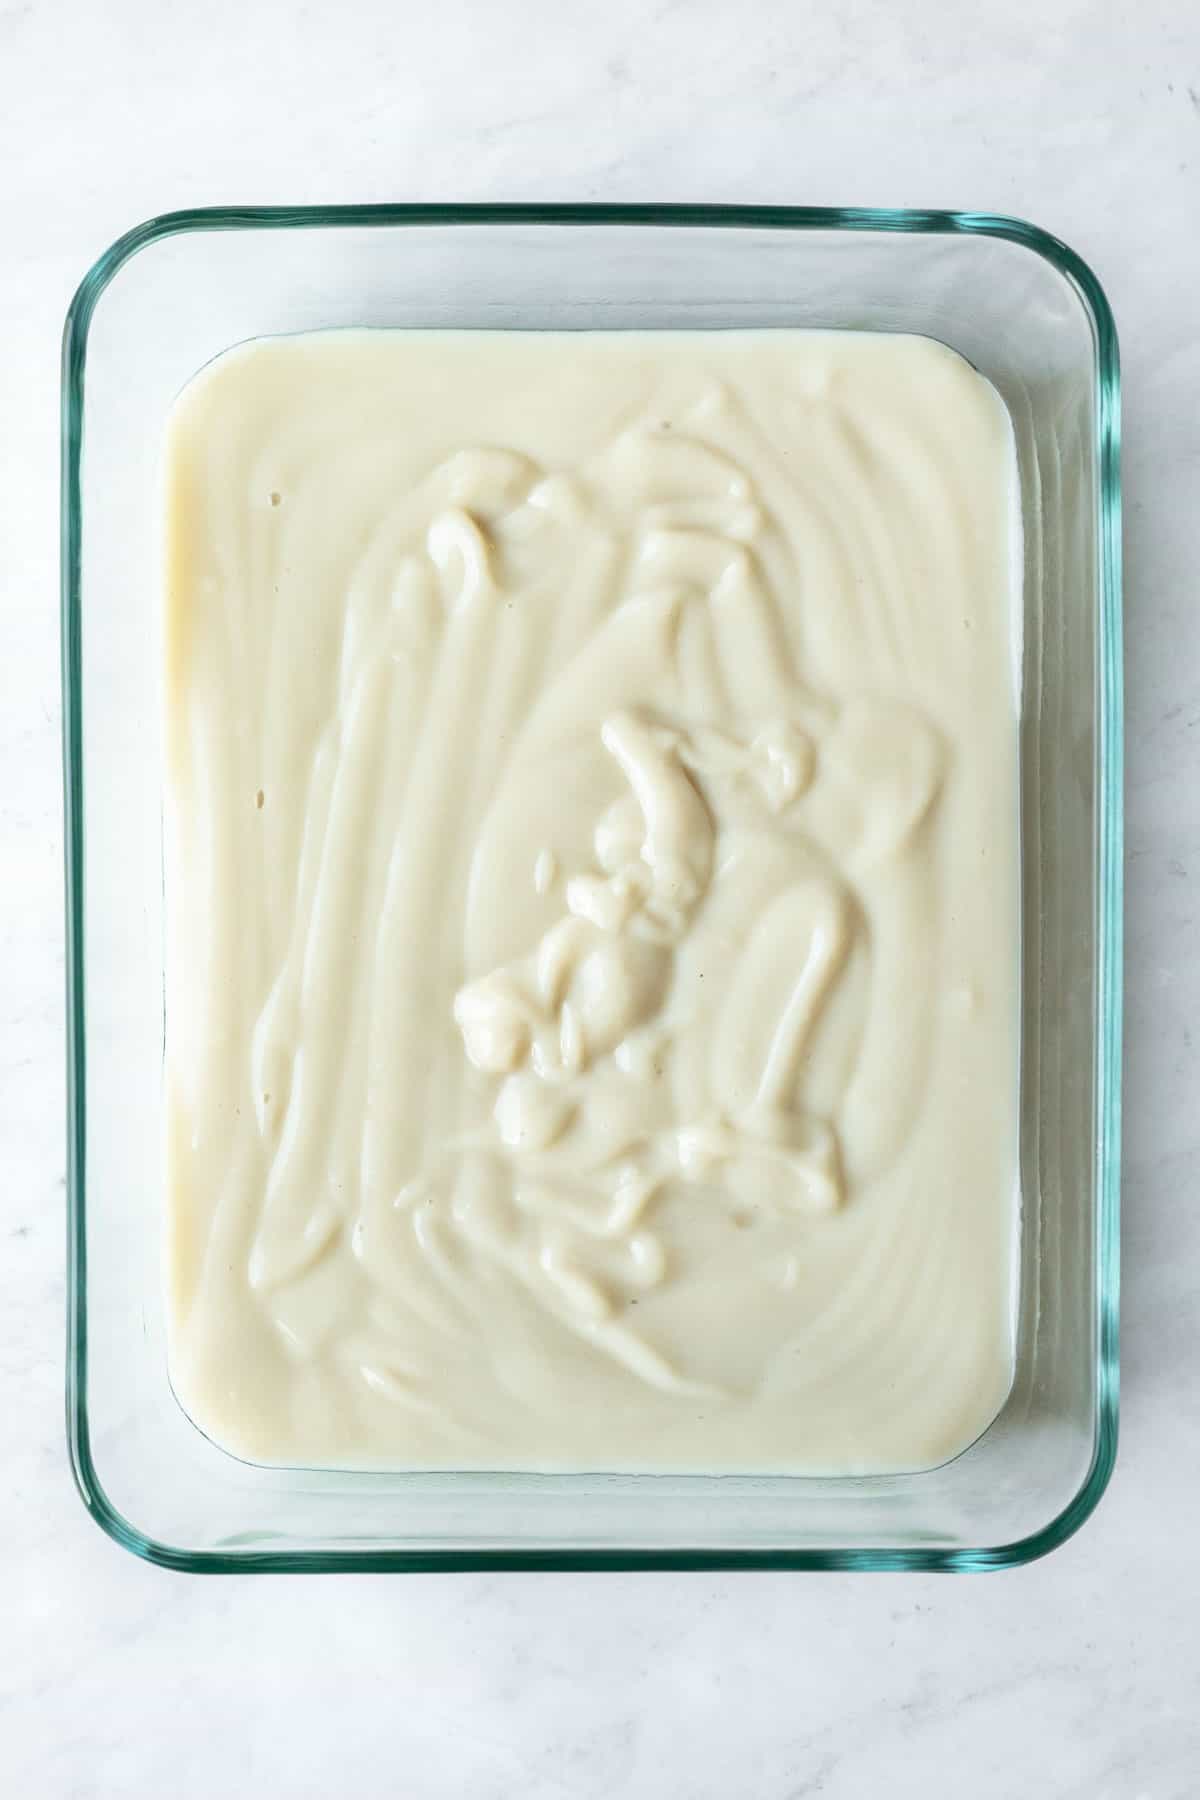 Freshly prepared vegan vanilla pudding in a glass container ready to be chilled.